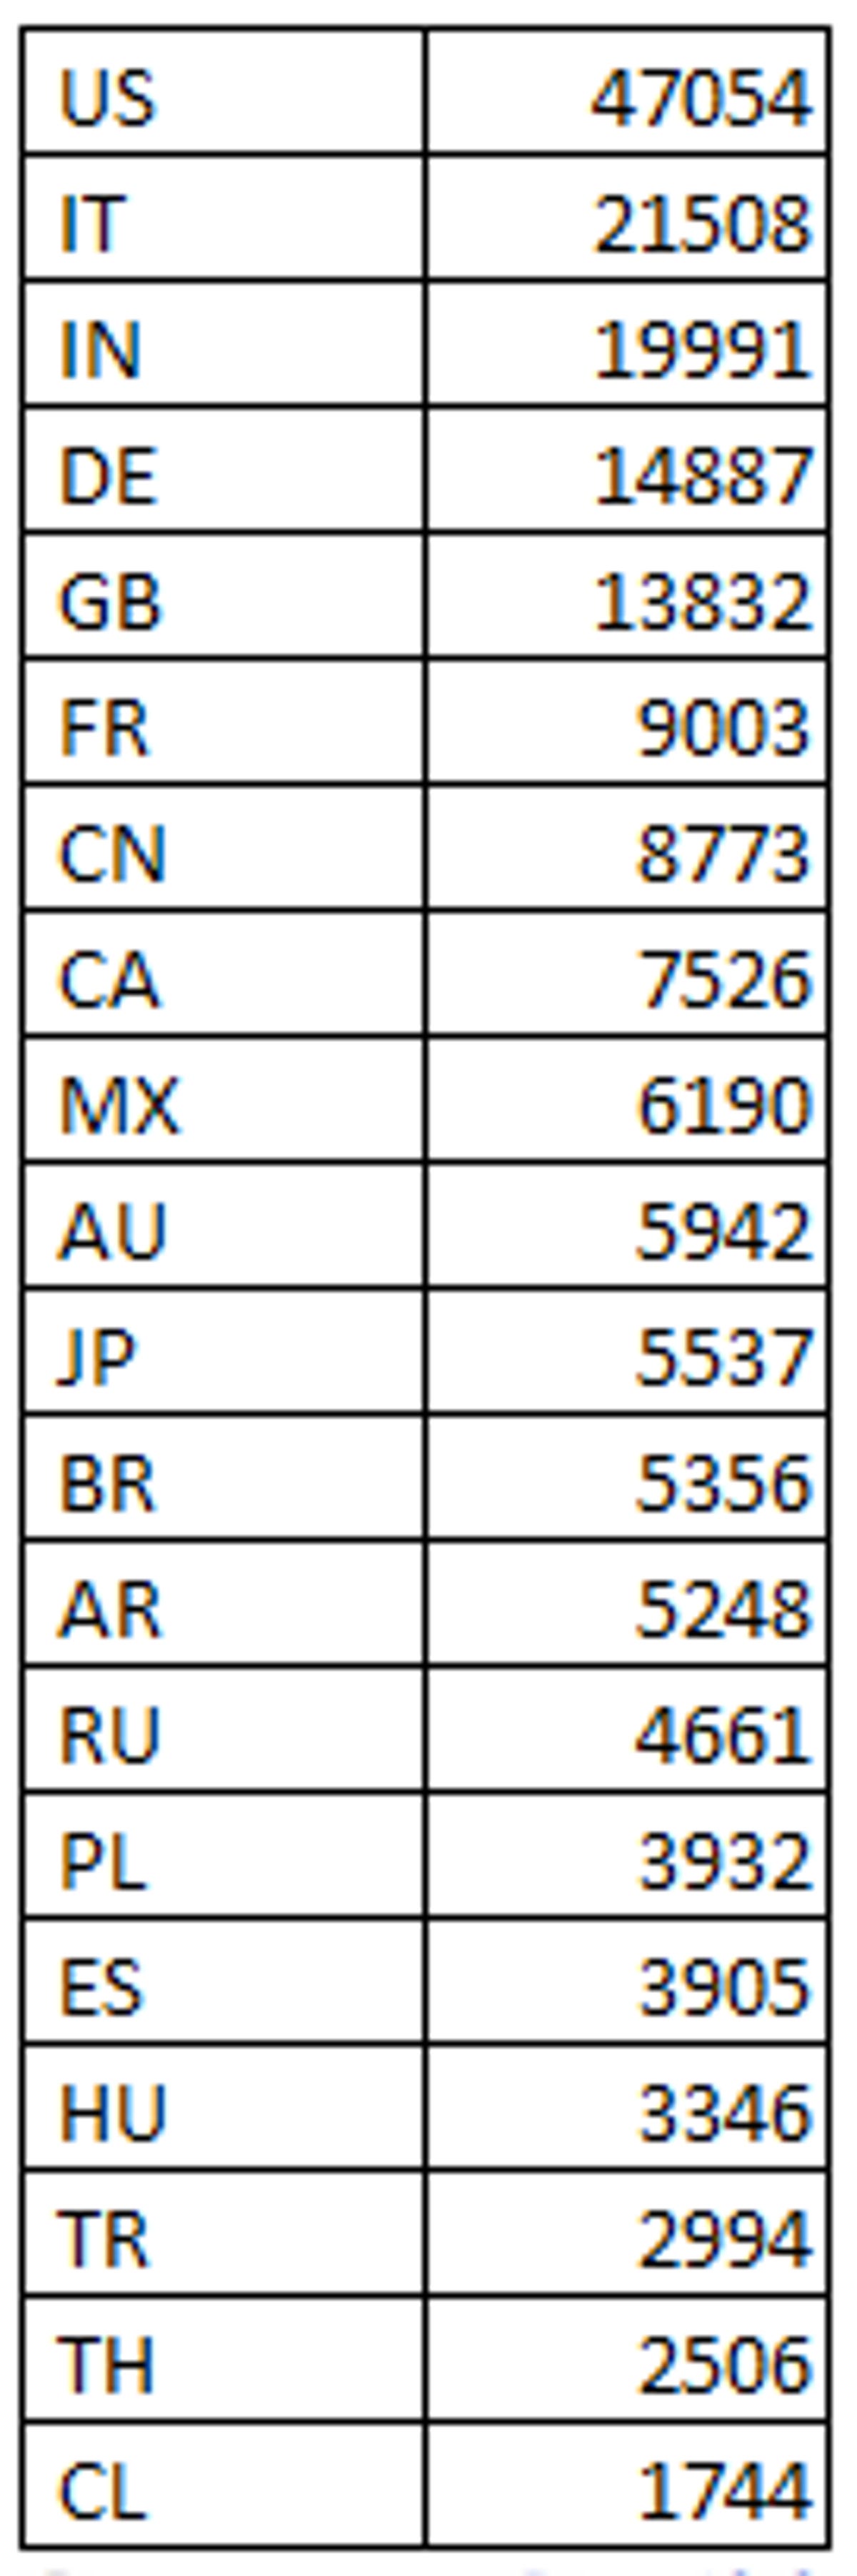 Top 20 countries and estimates of computers infected with DNSChanger this weekend.